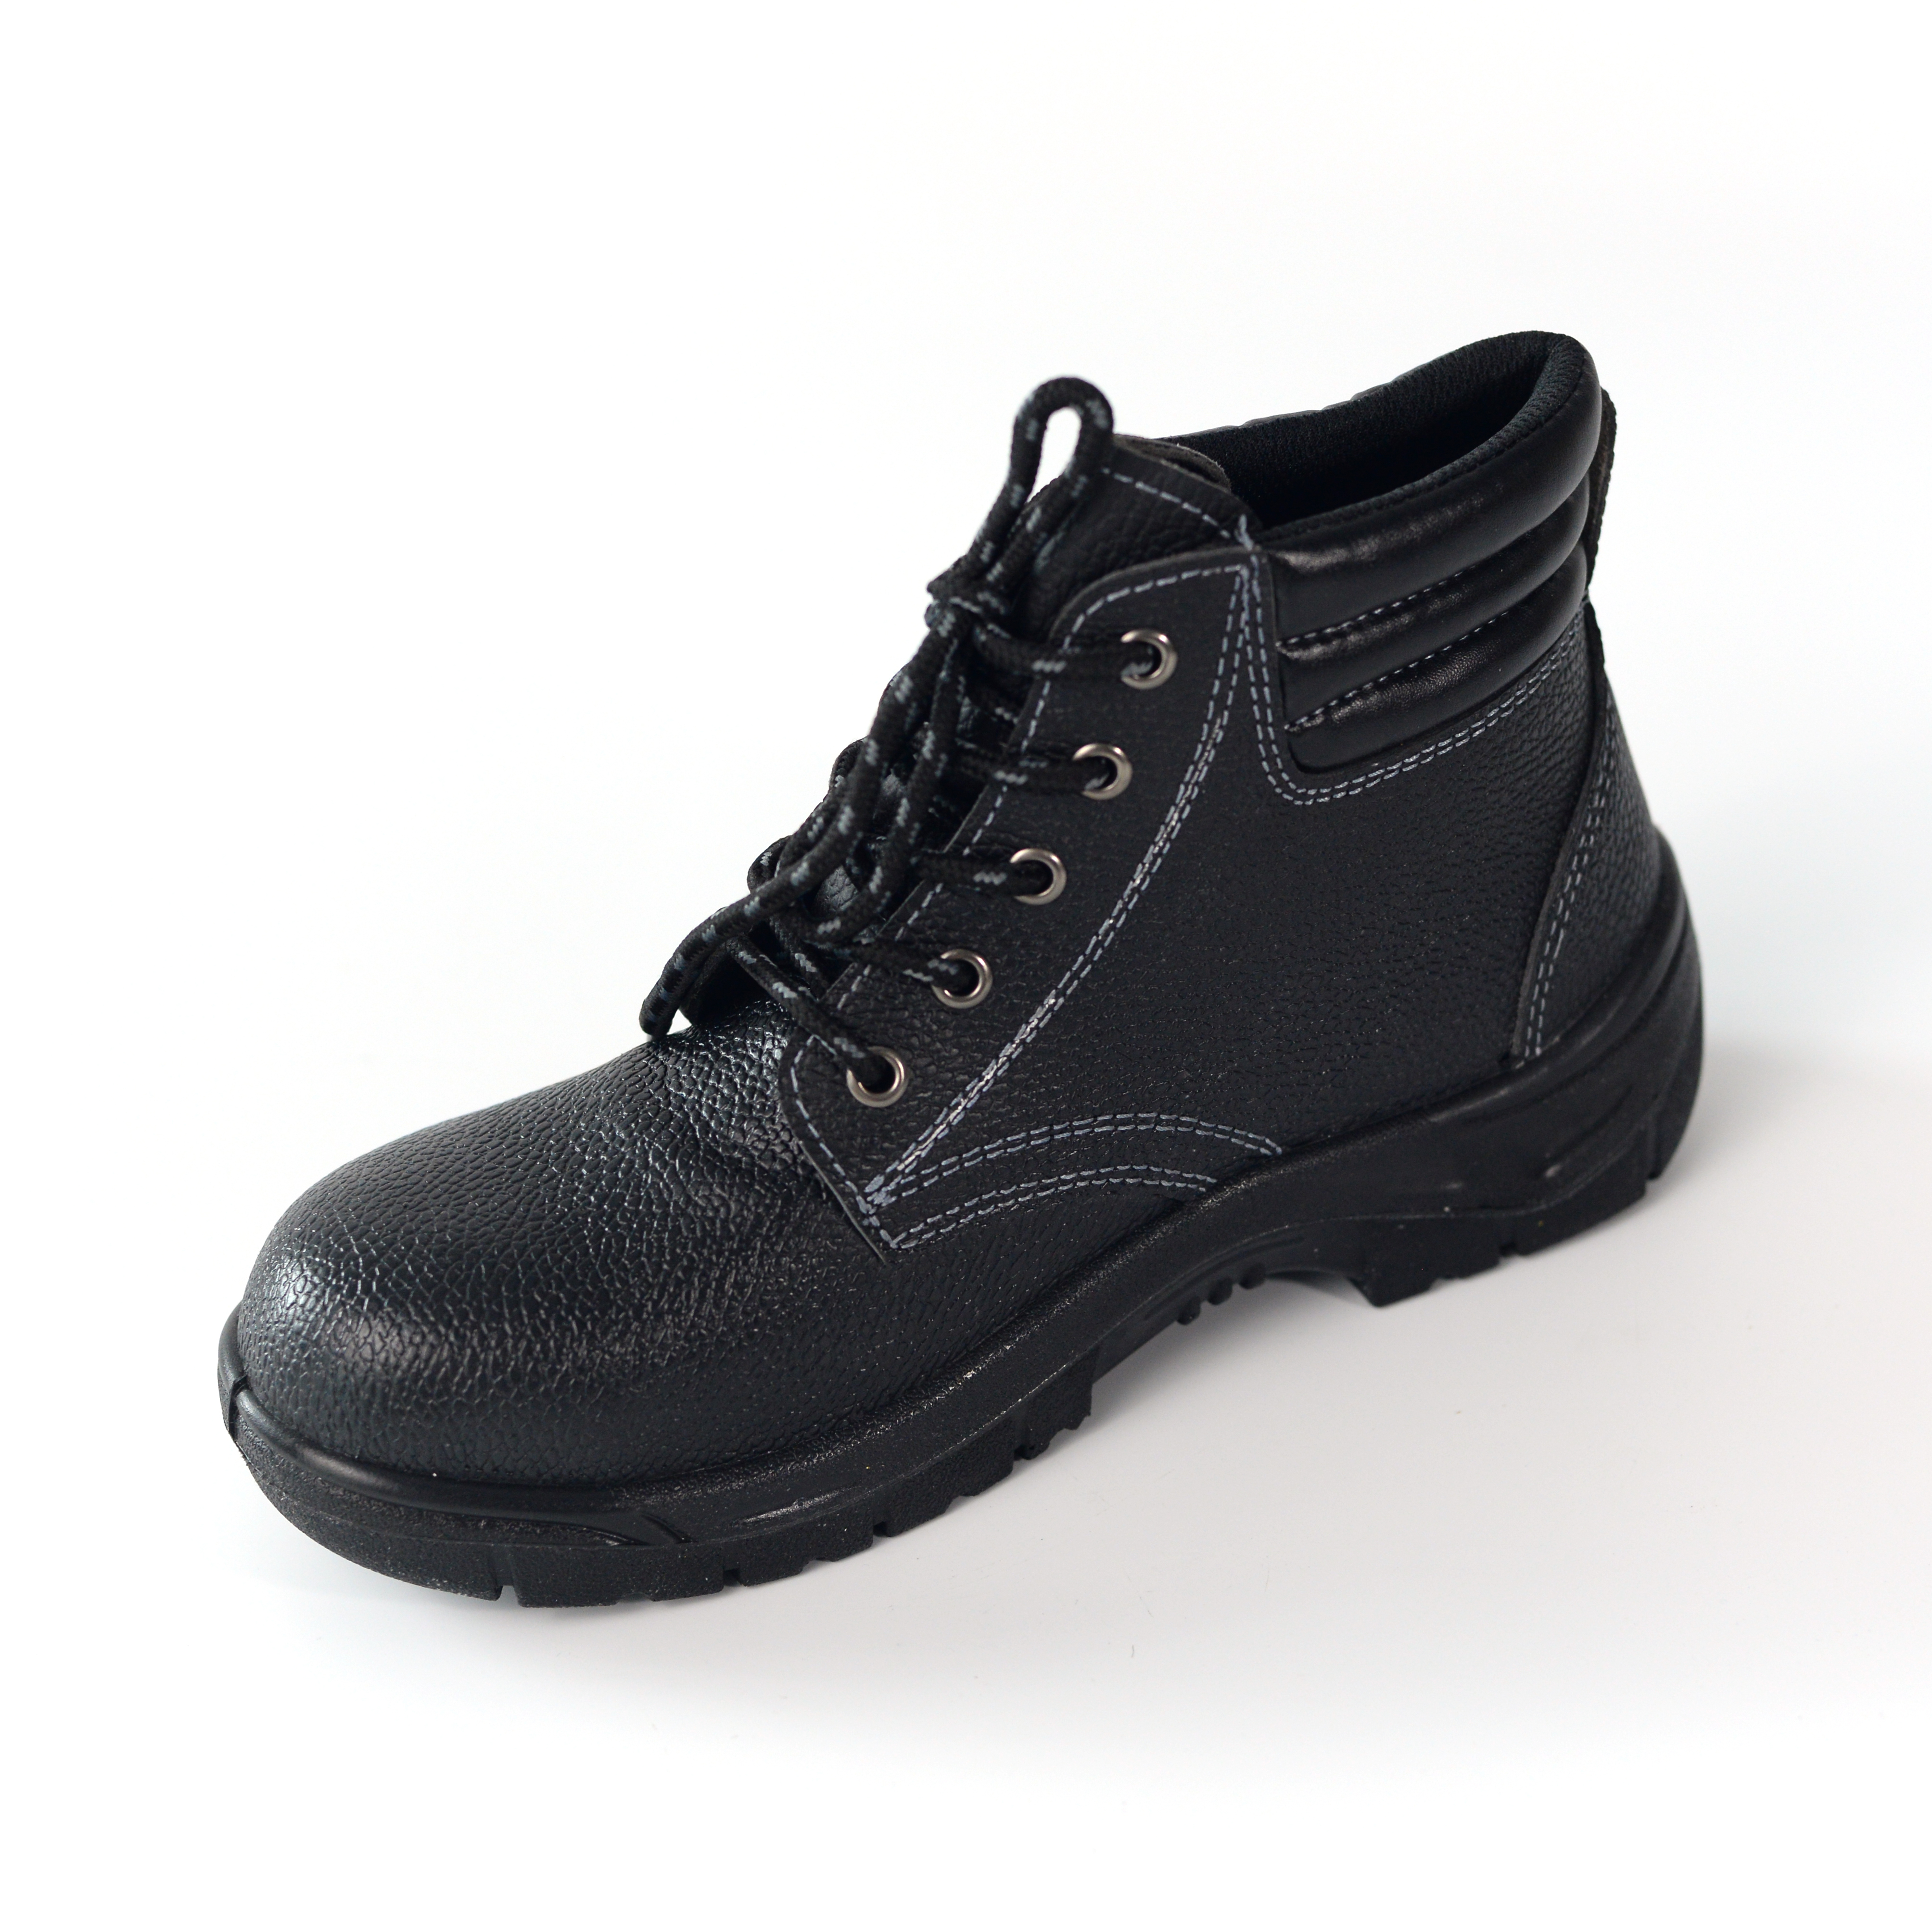 safety shoes work steel toe cap and double injection genuine leather shoes safety